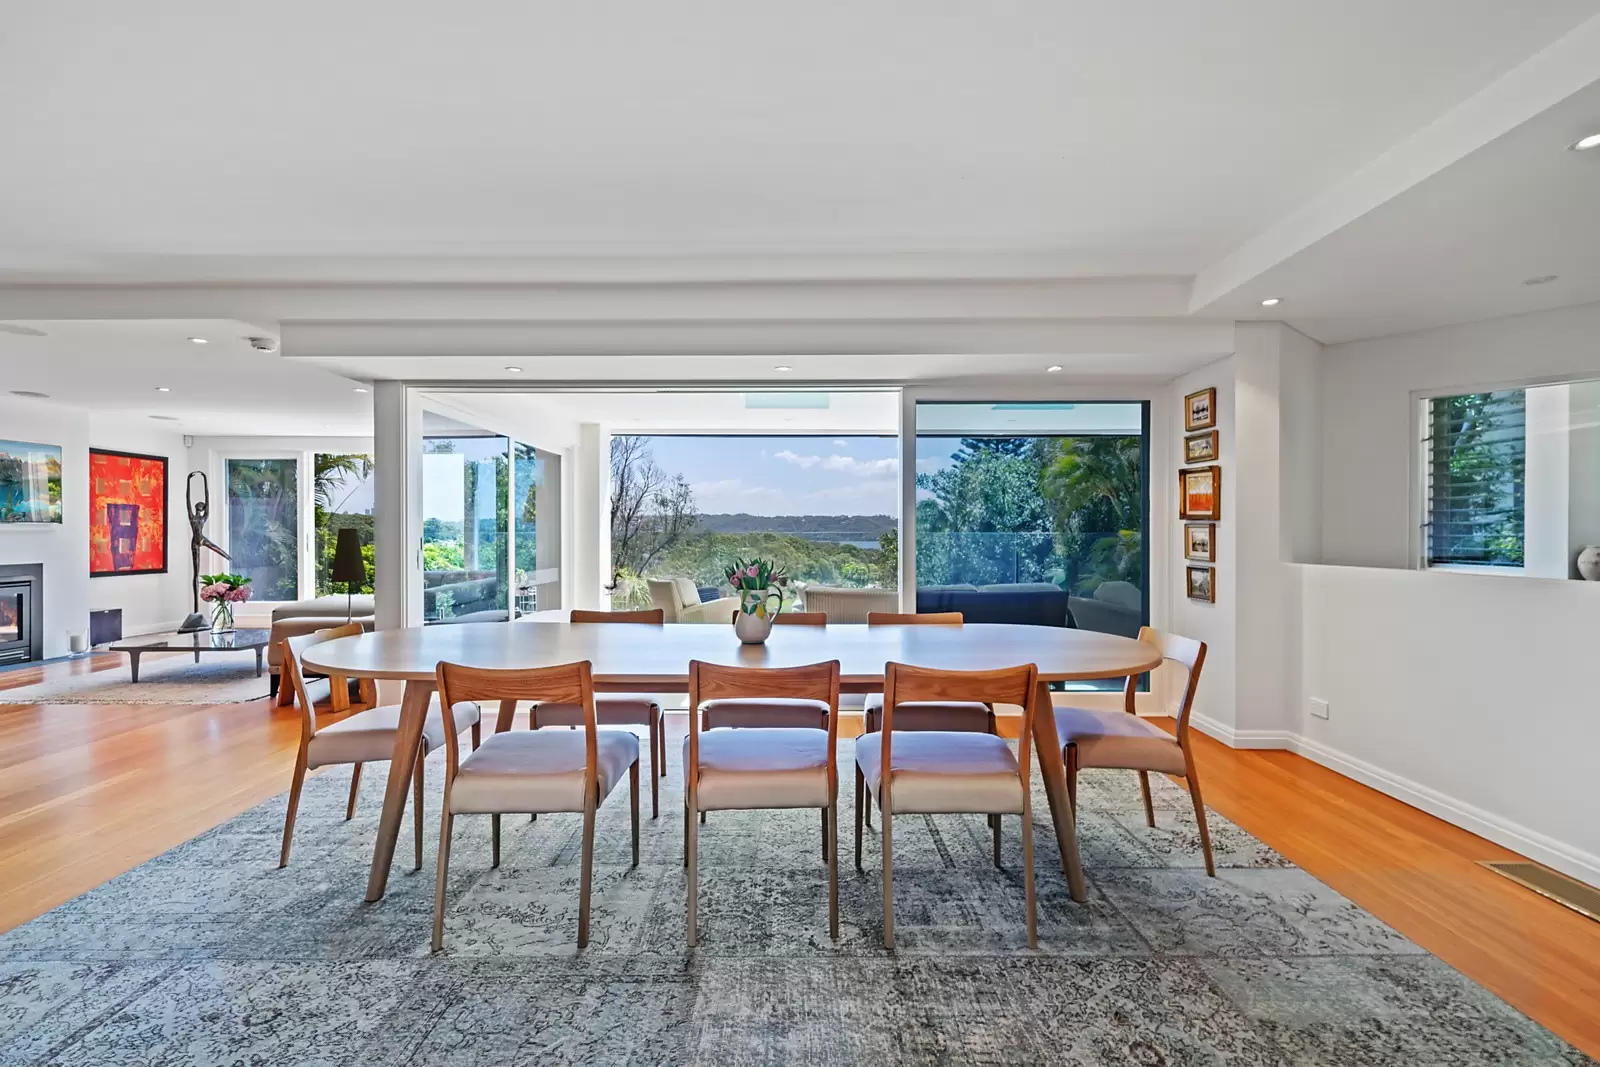 Photo #3: 18 Burrabirra Avenue, Vaucluse - Sold by Sydney Sotheby's International Realty